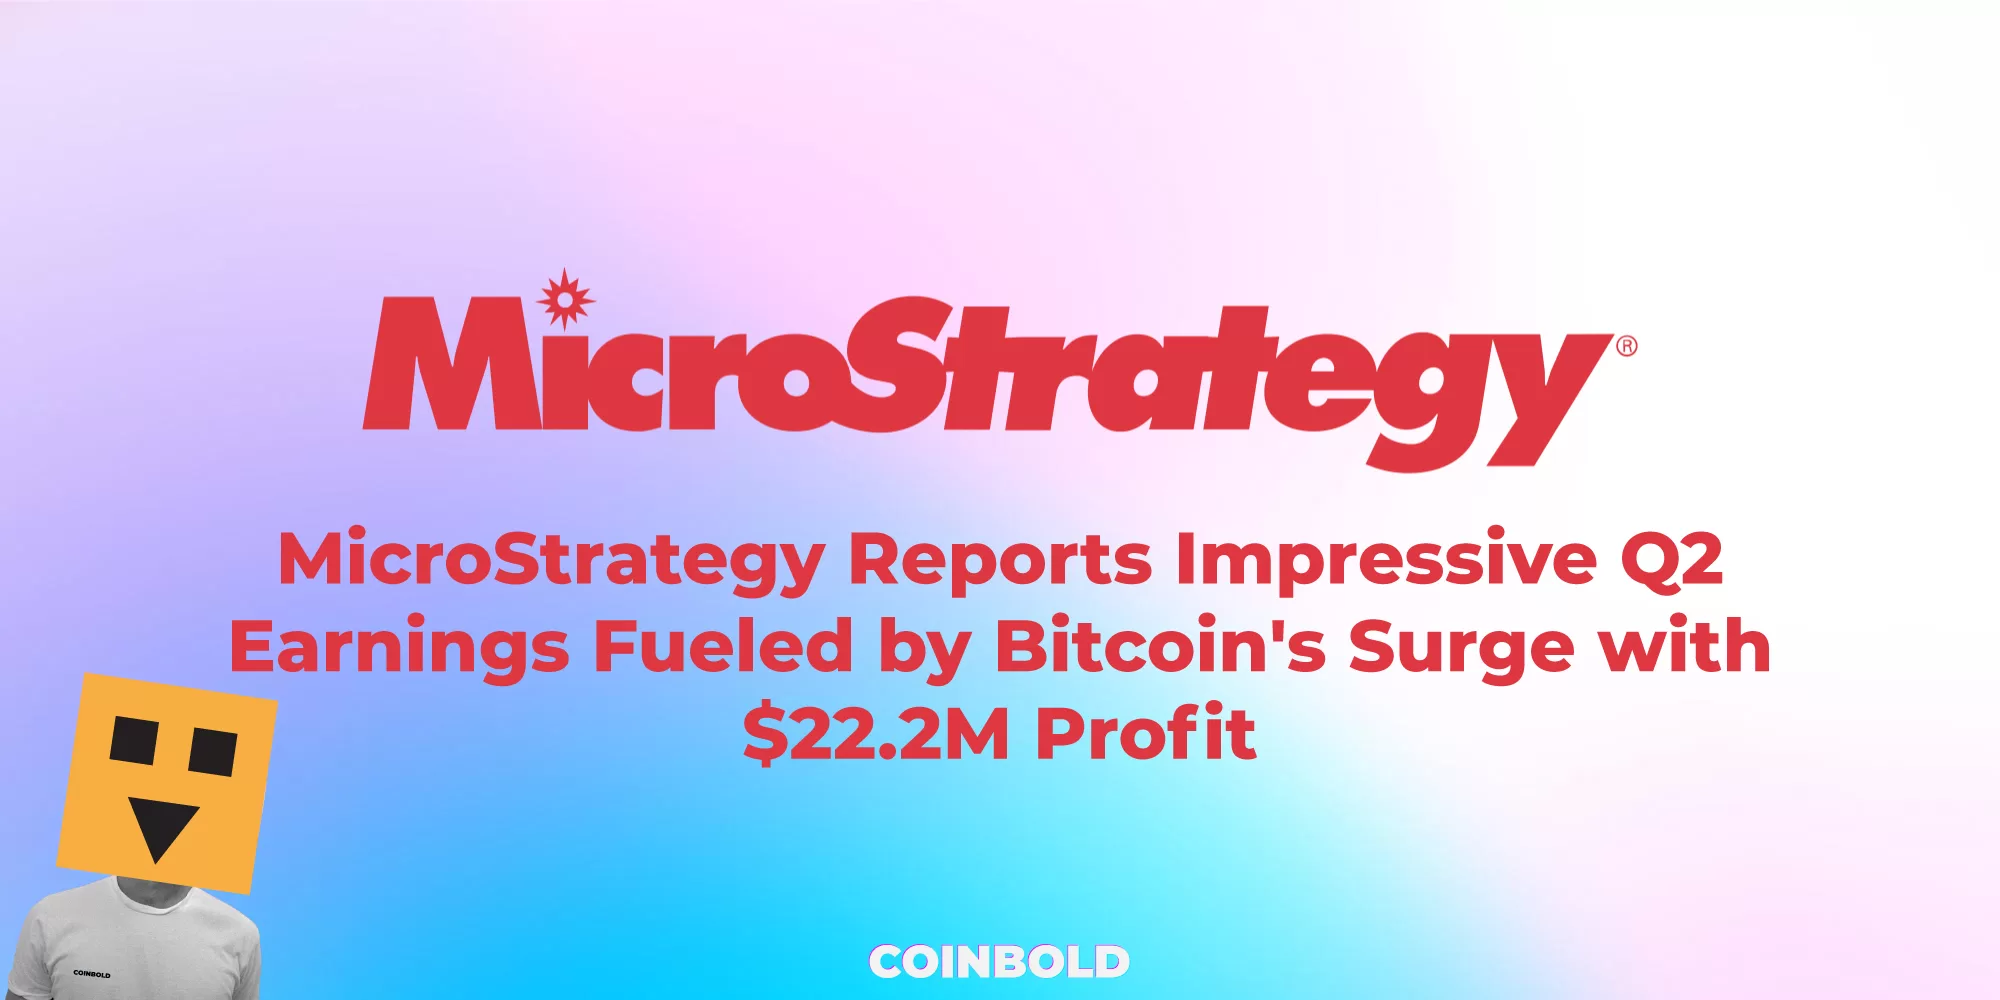 MicroStrategy Reports Impressive Q2 Earnings Fueled by Bitcoin's Surge with $22.2M Profit